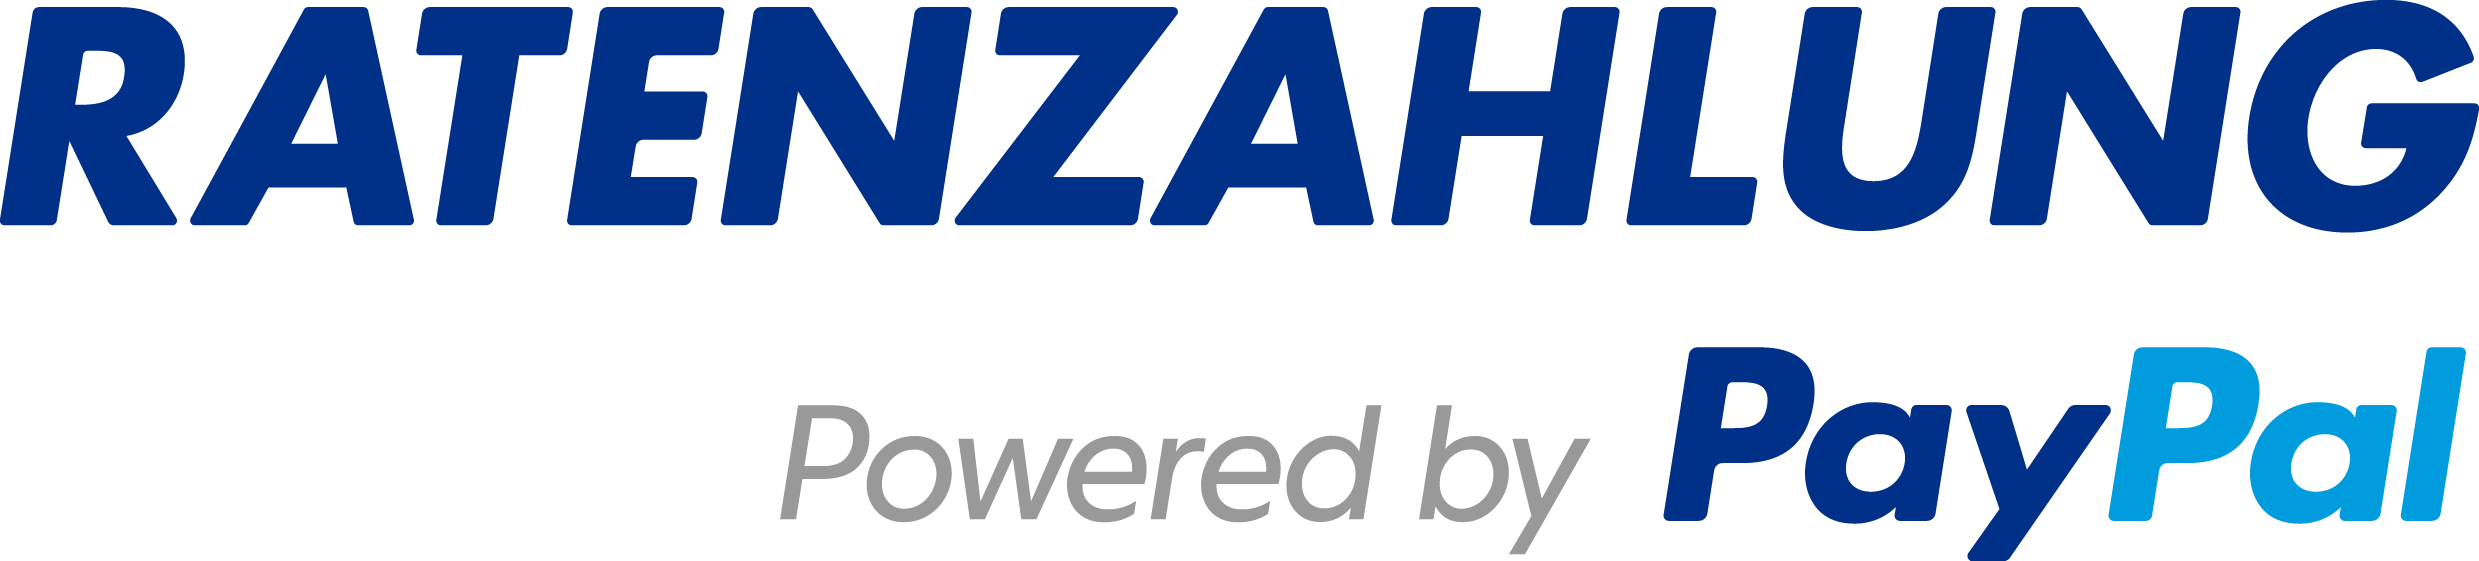 PayPal-Ratenzahlung-Logo